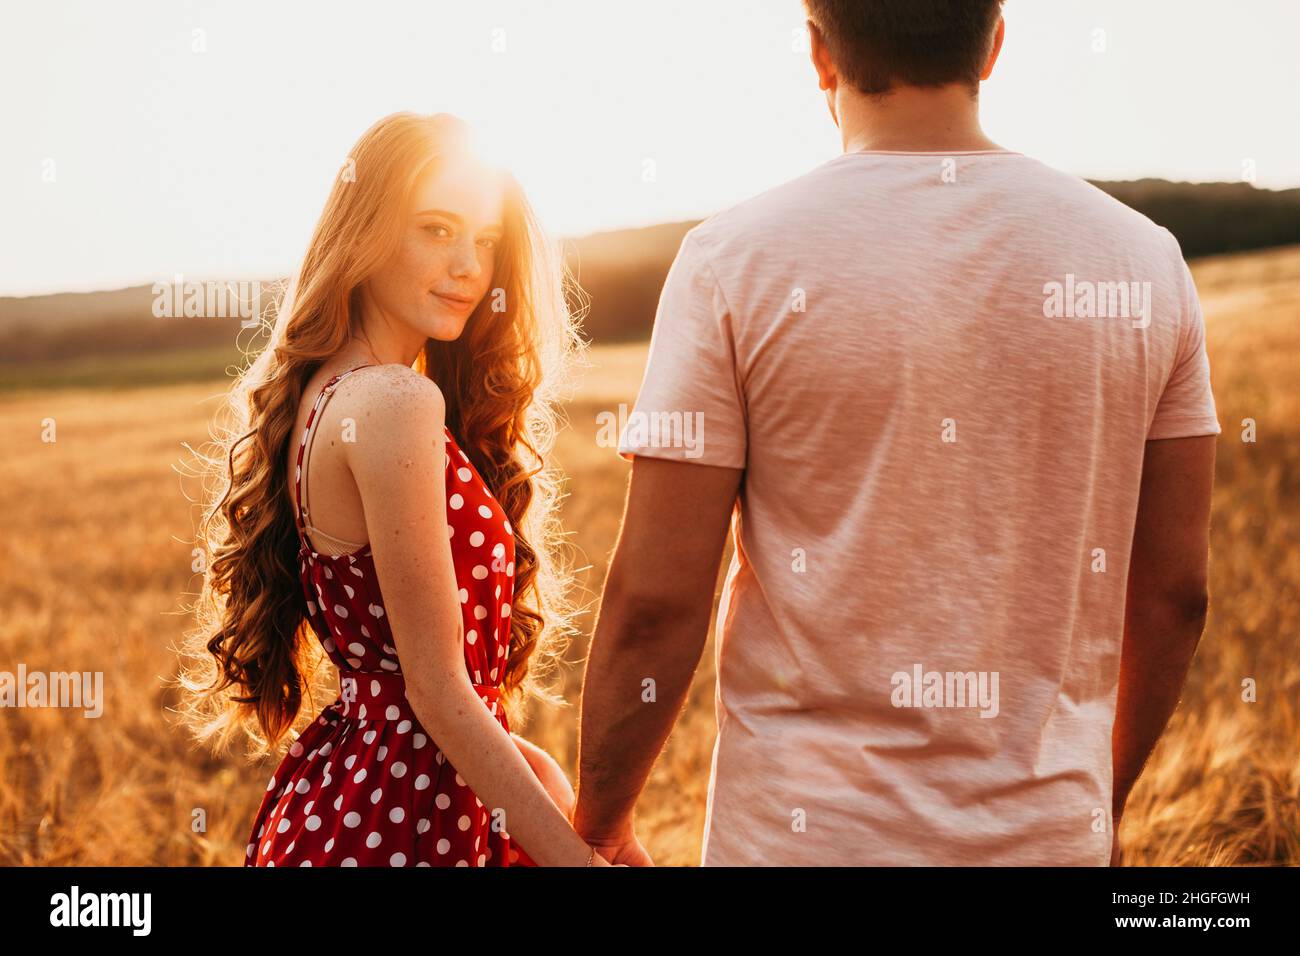 Redheaded girl holding her boyfriend's hand walking through wheat field holding hands. For lifestyle design. Holding hand. Wheat field. Stock Photo